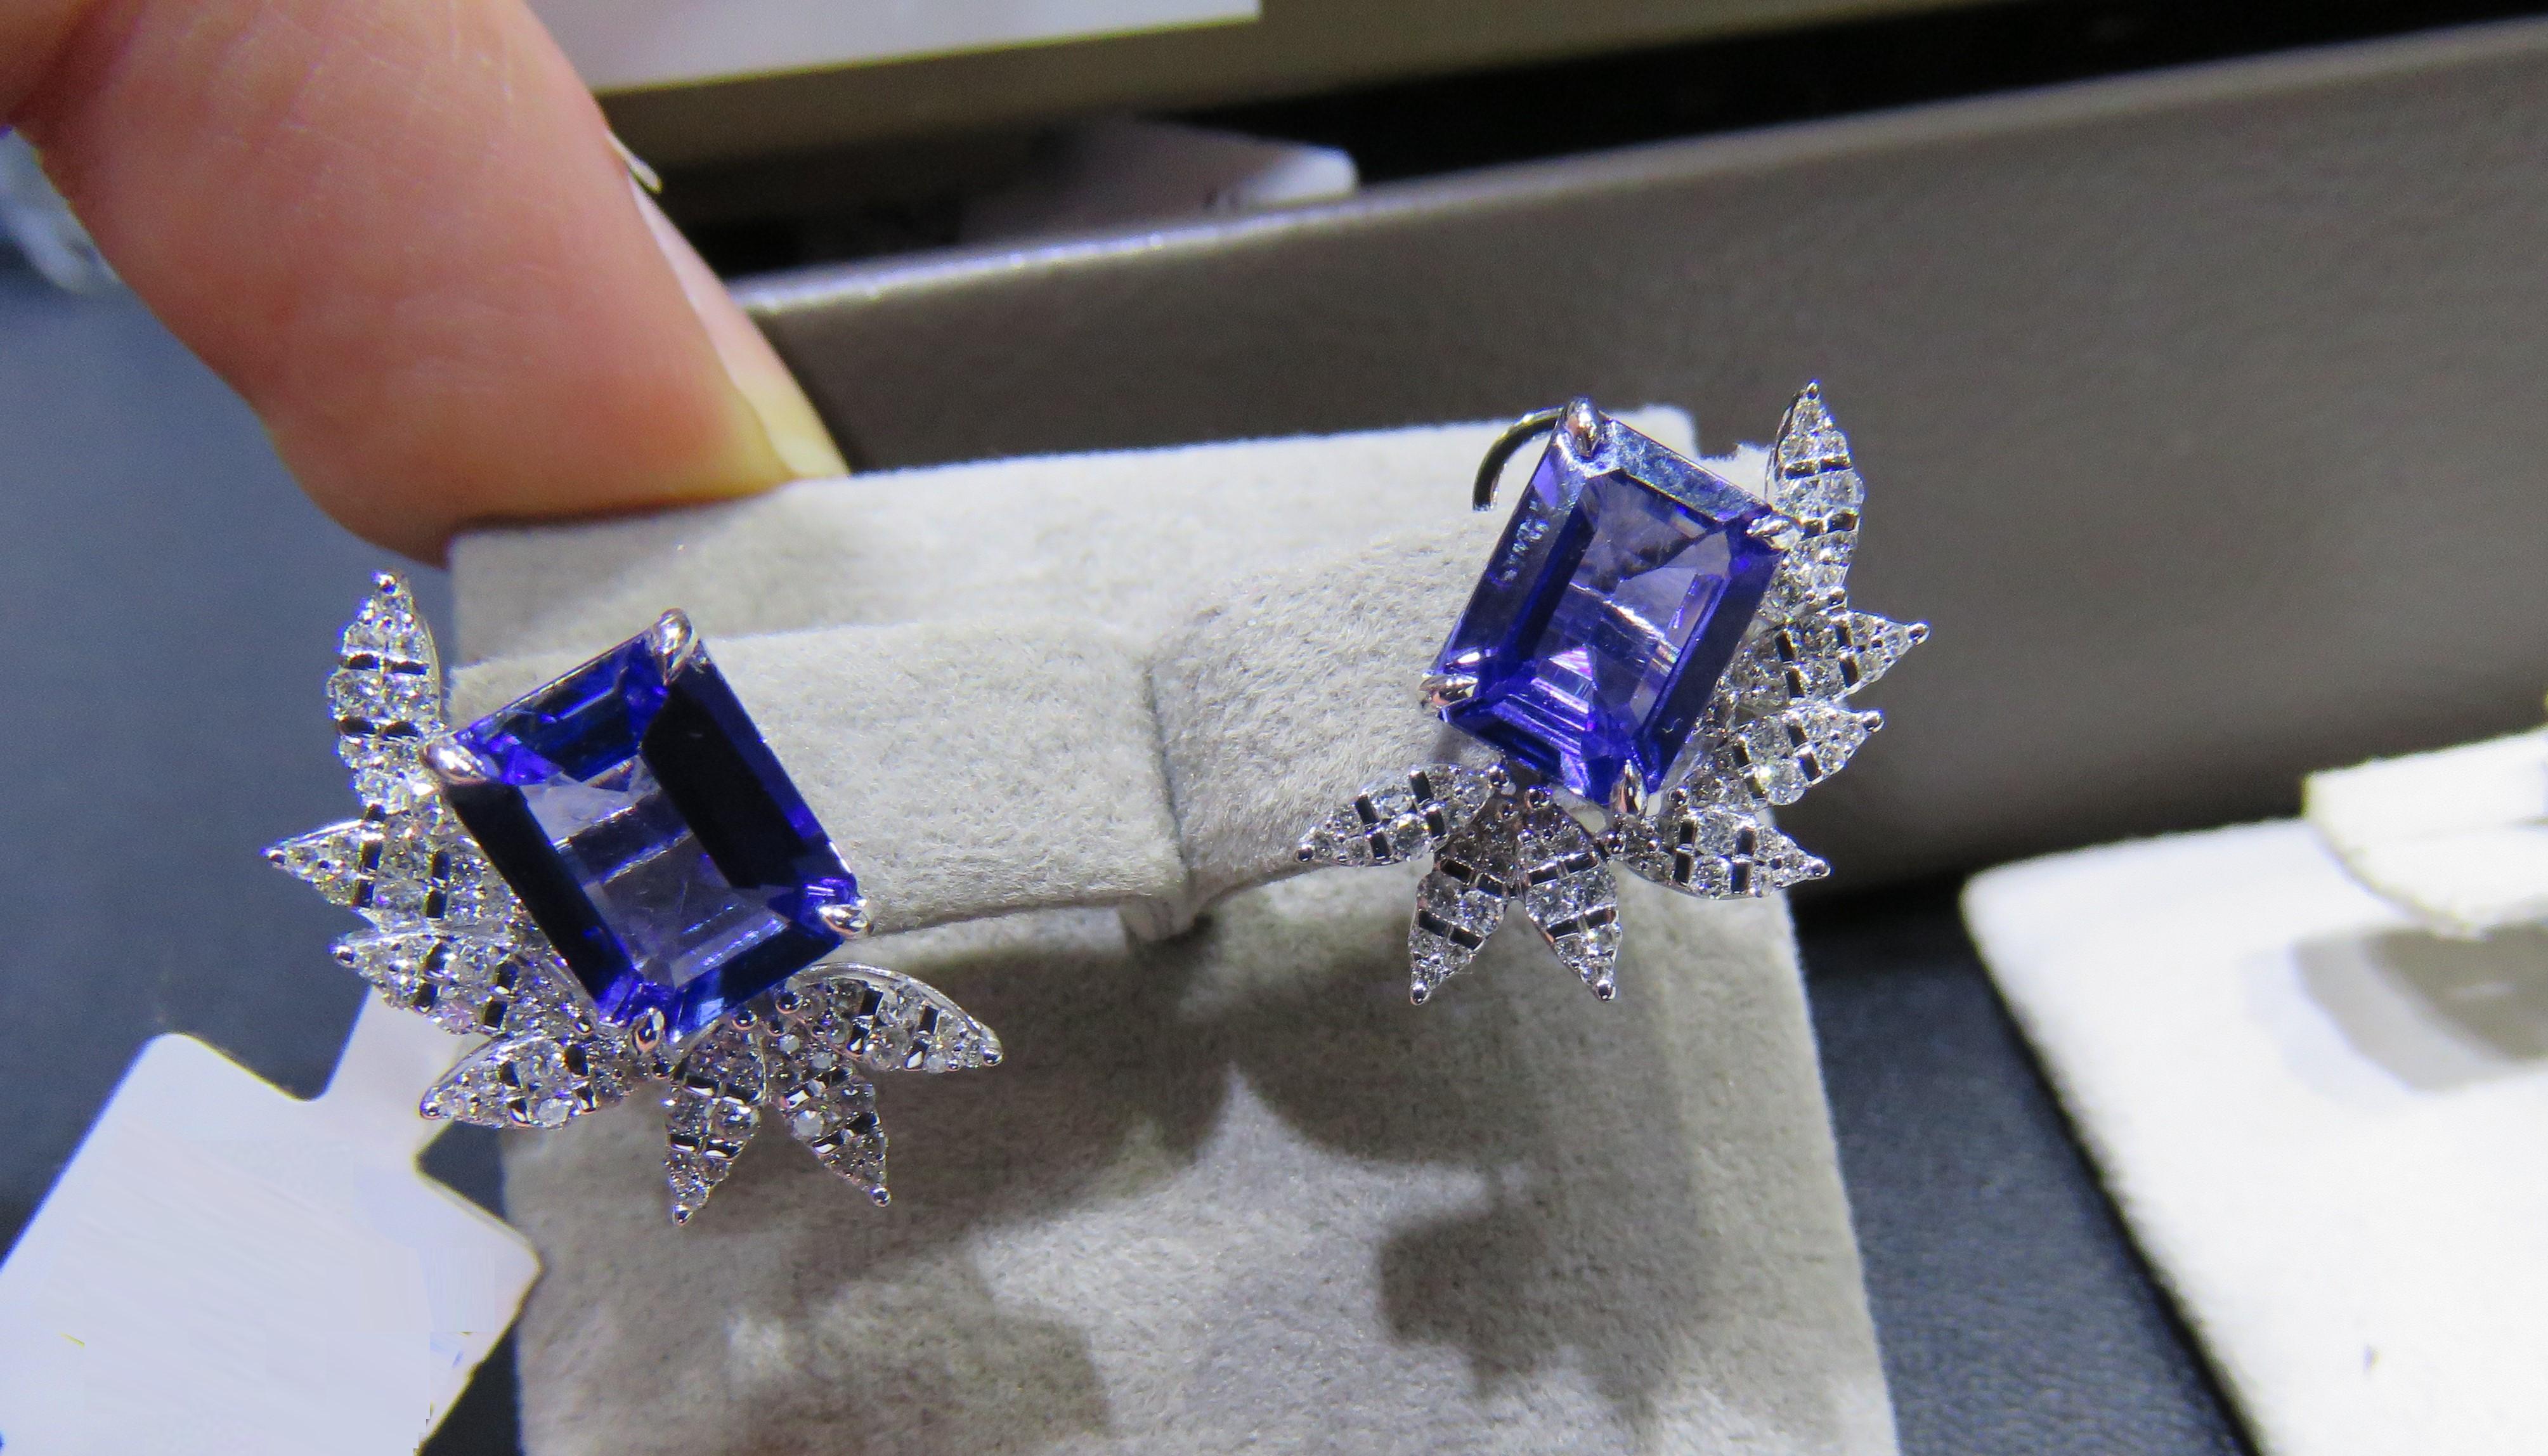 The Following Items we are offering is a Pair of Rare 18KT Gold Large Fancy Tanzanite Diamond Earrings. Earrings are comprised of Finely Set Gorgeous Large Gorgeous Fancy Colored Tanzanite Diamond Earrings!!! T.C.W. Approx 5CTS!! These Gorgeous